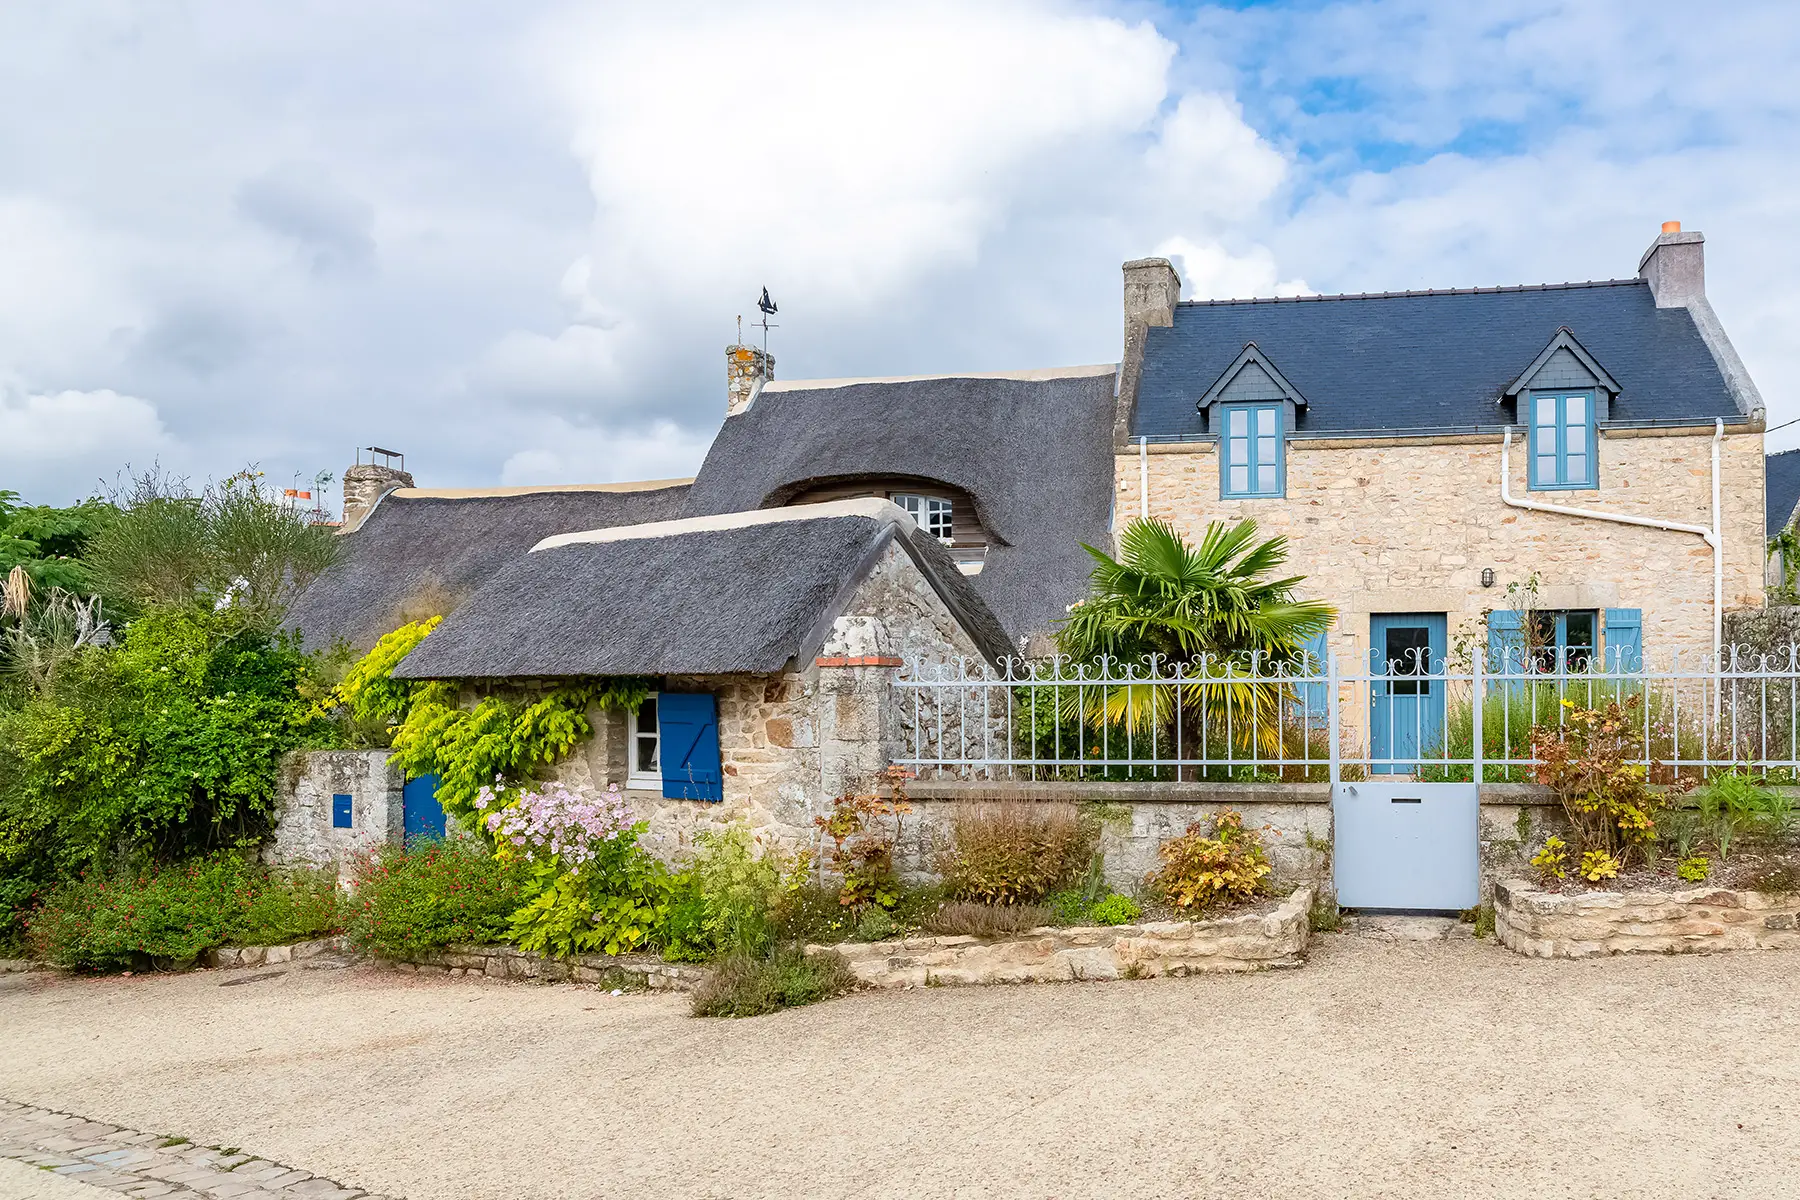 A stone house in a village in Brittany